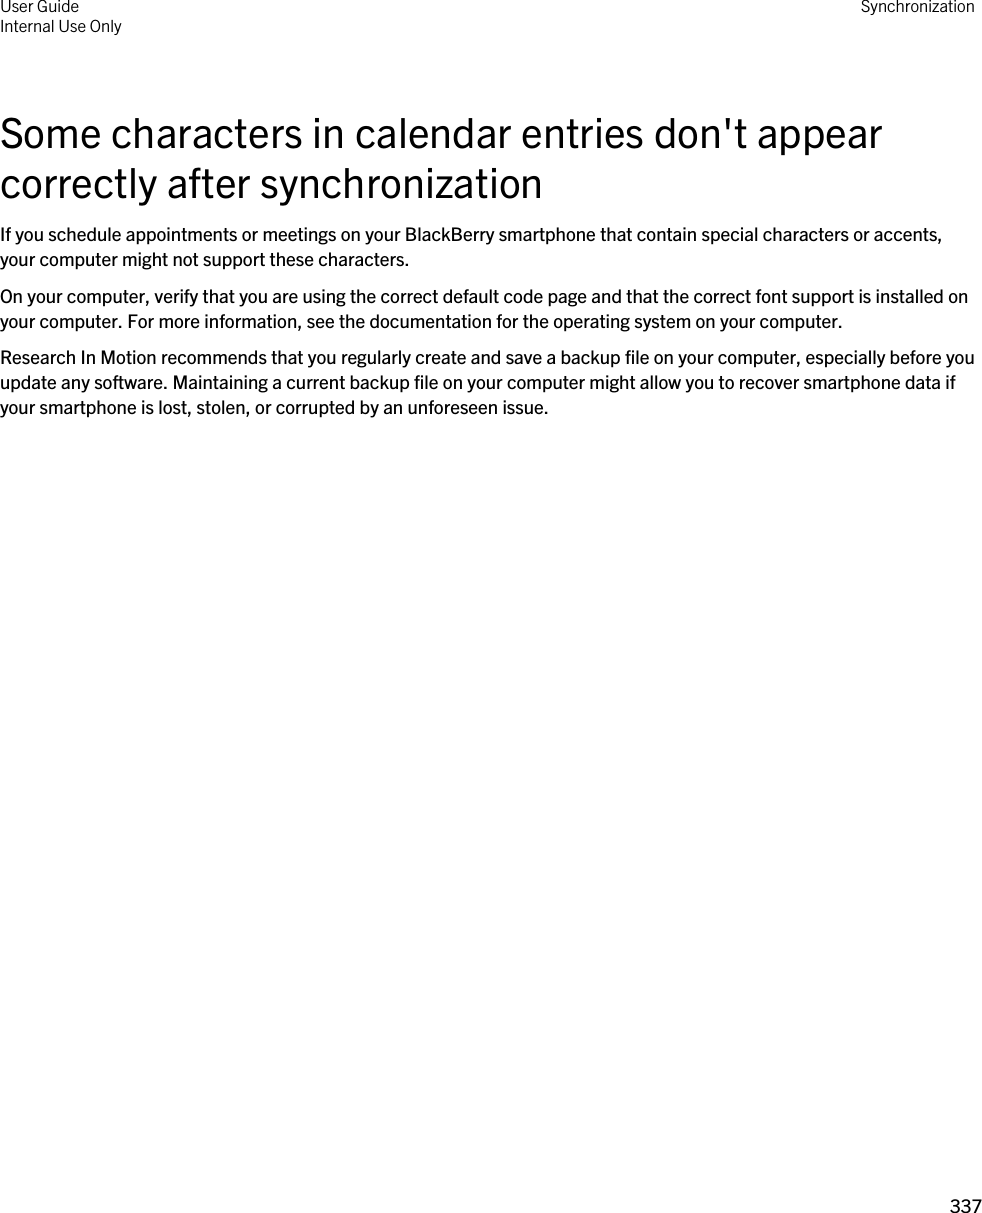 Some characters in calendar entries don&apos;t appear correctly after synchronizationIf you schedule appointments or meetings on your BlackBerry smartphone that contain special characters or accents, your computer might not support these characters.On your computer, verify that you are using the correct default code page and that the correct font support is installed on your computer. For more information, see the documentation for the operating system on your computer.Research In Motion recommends that you regularly create and save a backup file on your computer, especially before you update any software. Maintaining a current backup file on your computer might allow you to recover smartphone data if your smartphone is lost, stolen, or corrupted by an unforeseen issue.User GuideInternal Use Only Synchronization337 